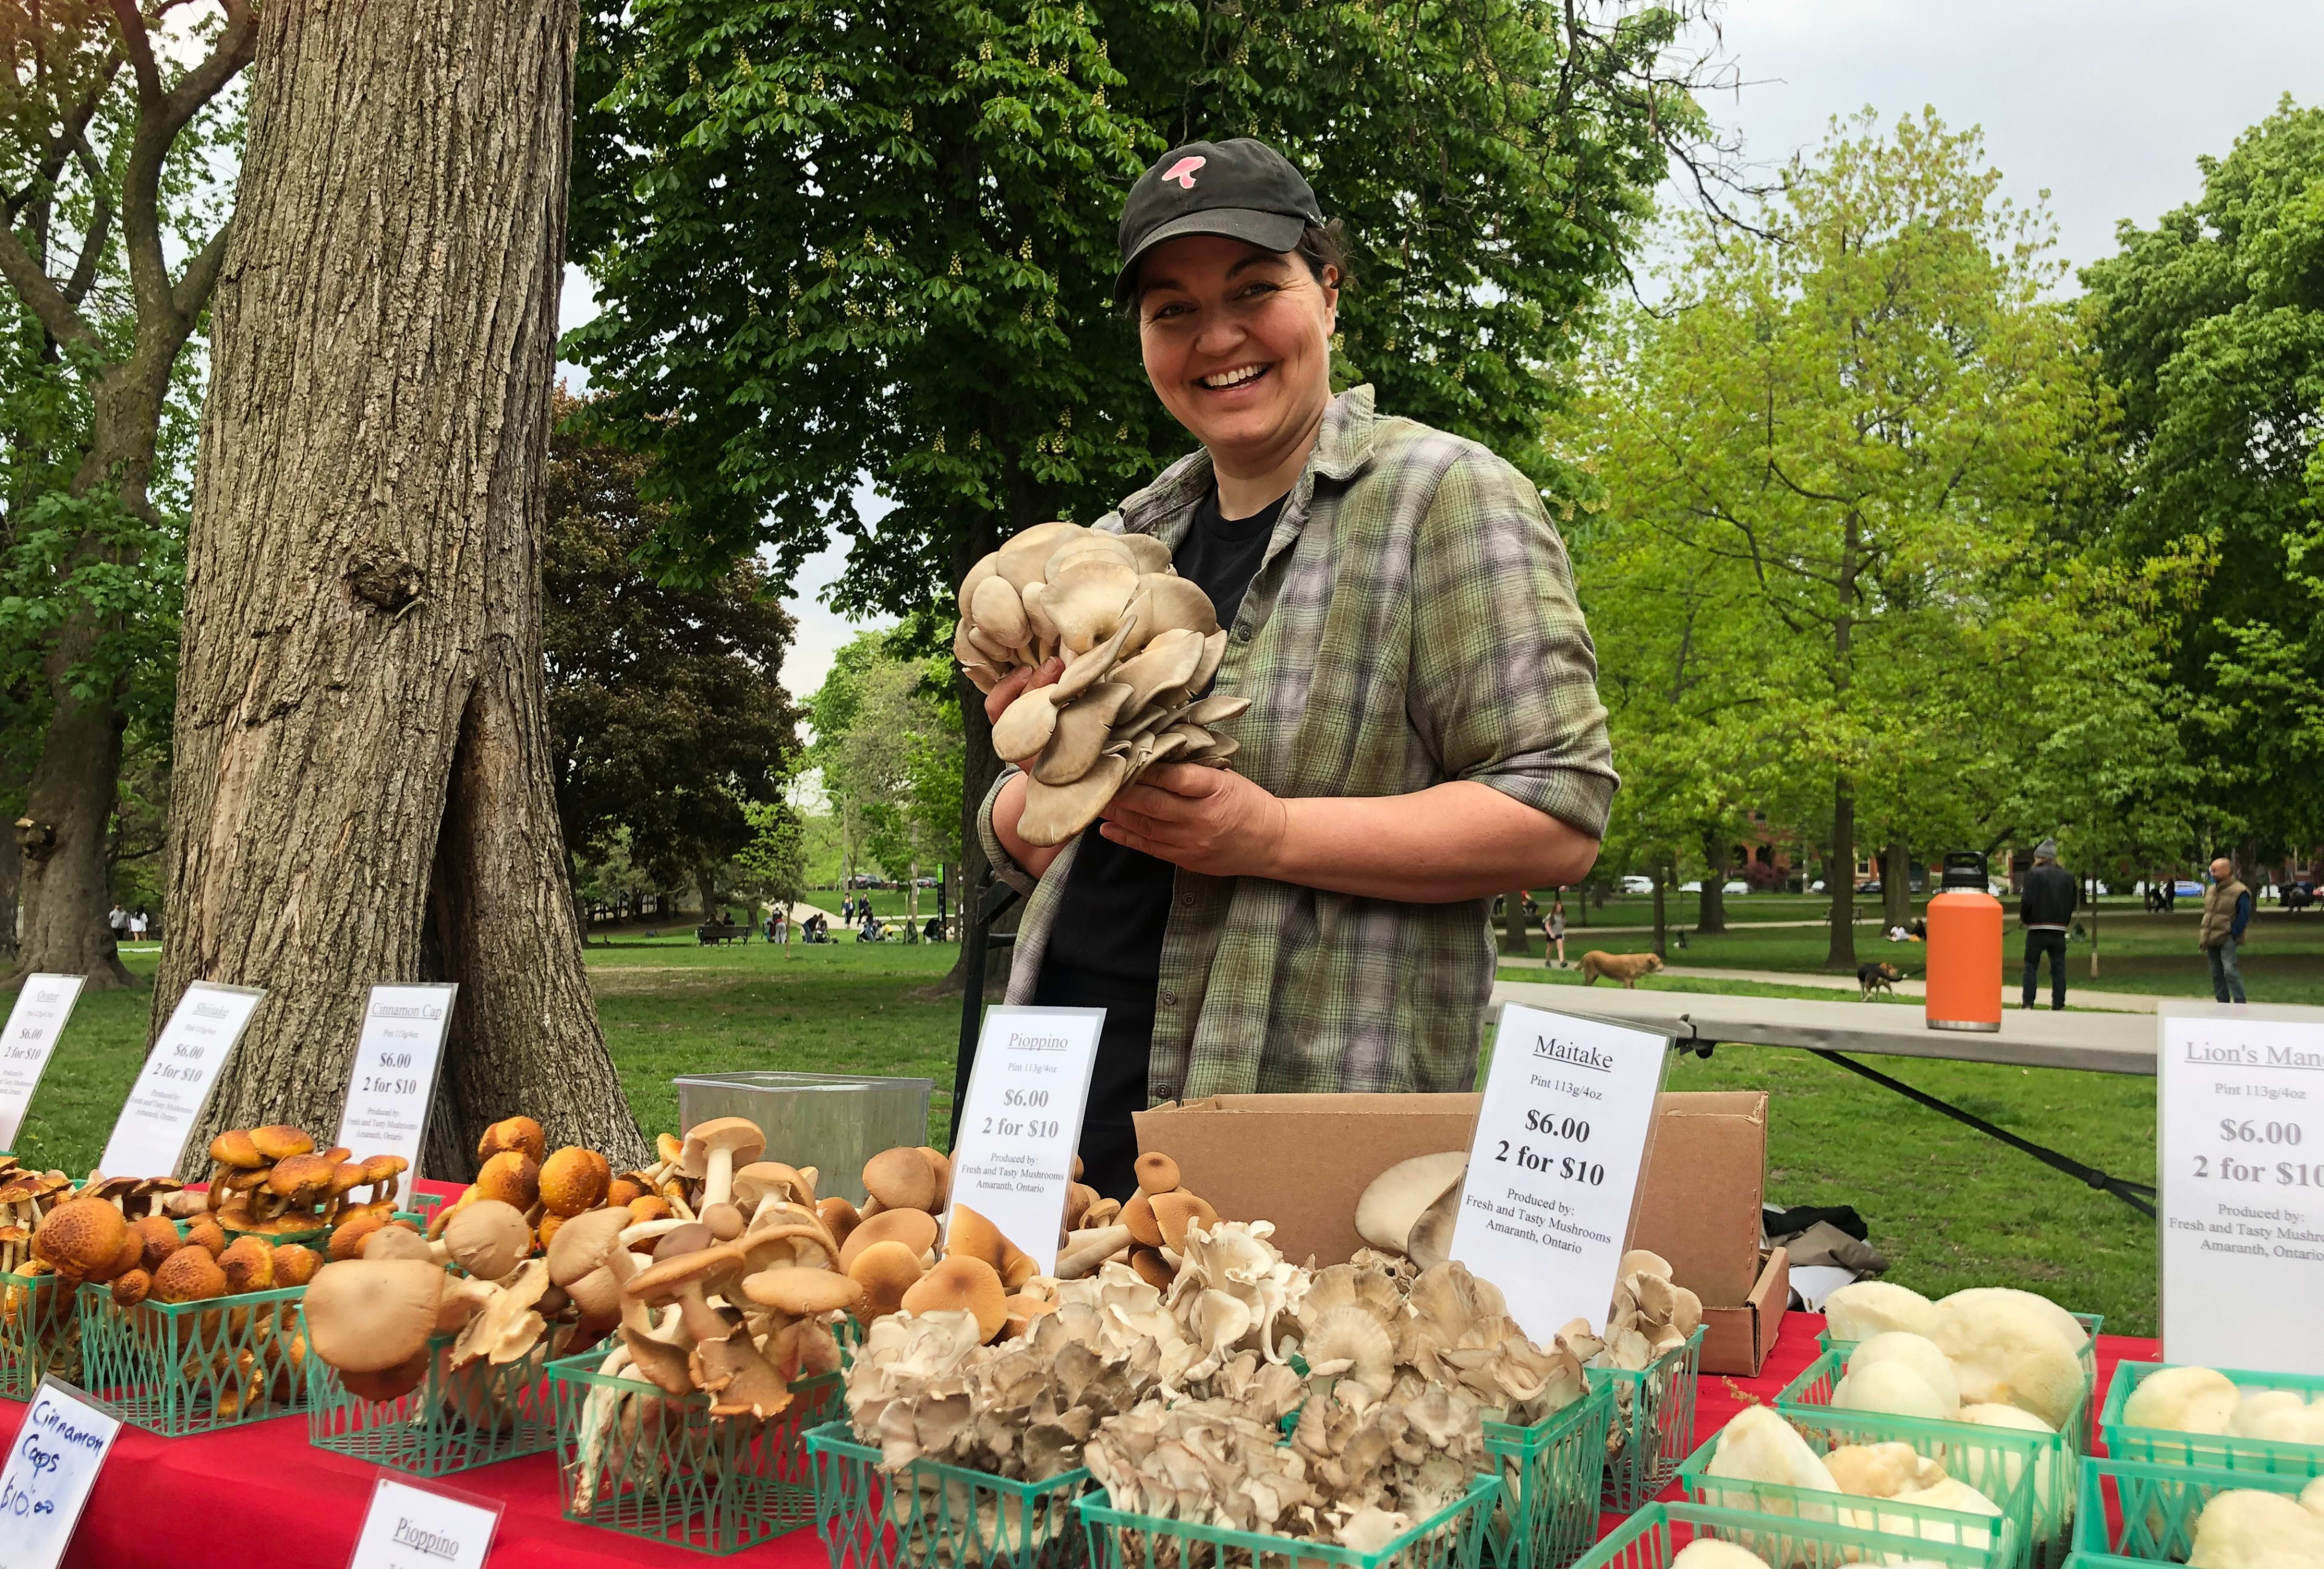 Vendor standing in front of table with mushrooms holding a mushroom